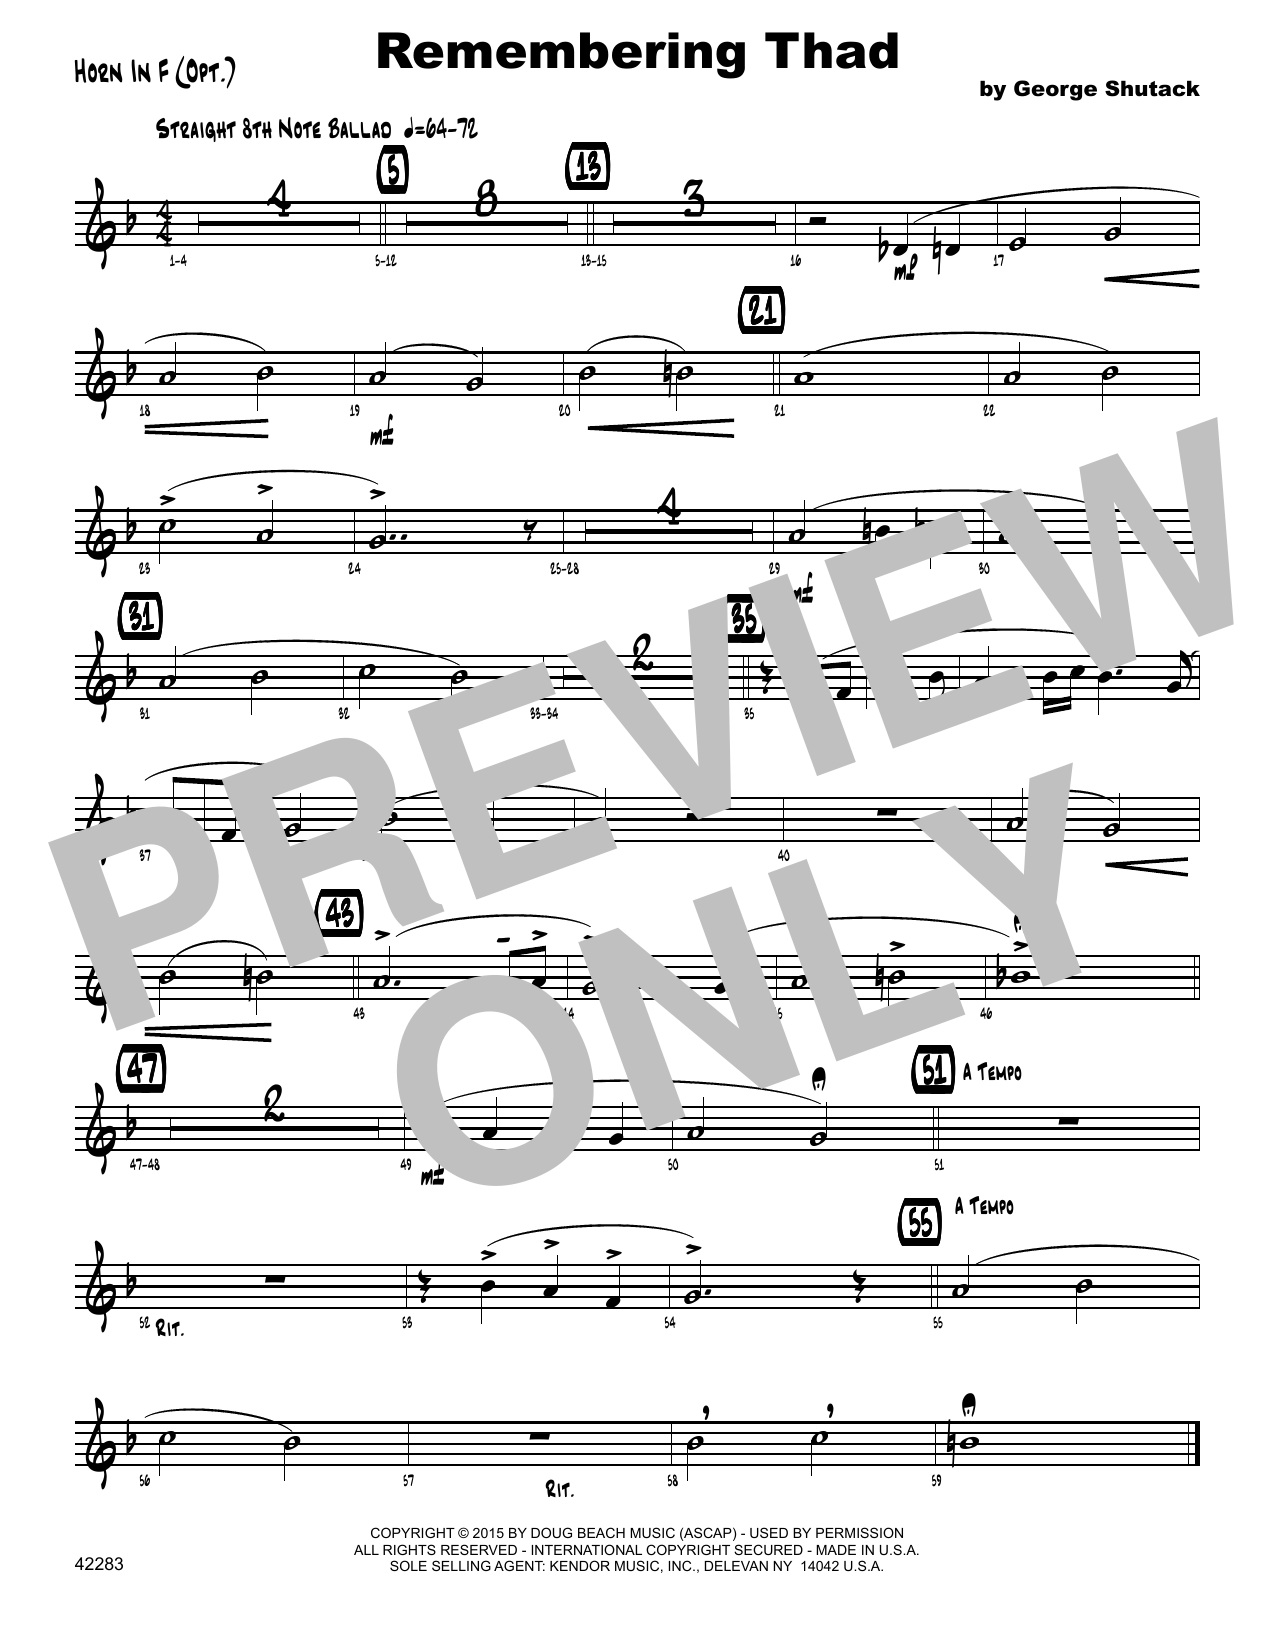 Download George Shutack Remembering Thad - Horn in F Sheet Music